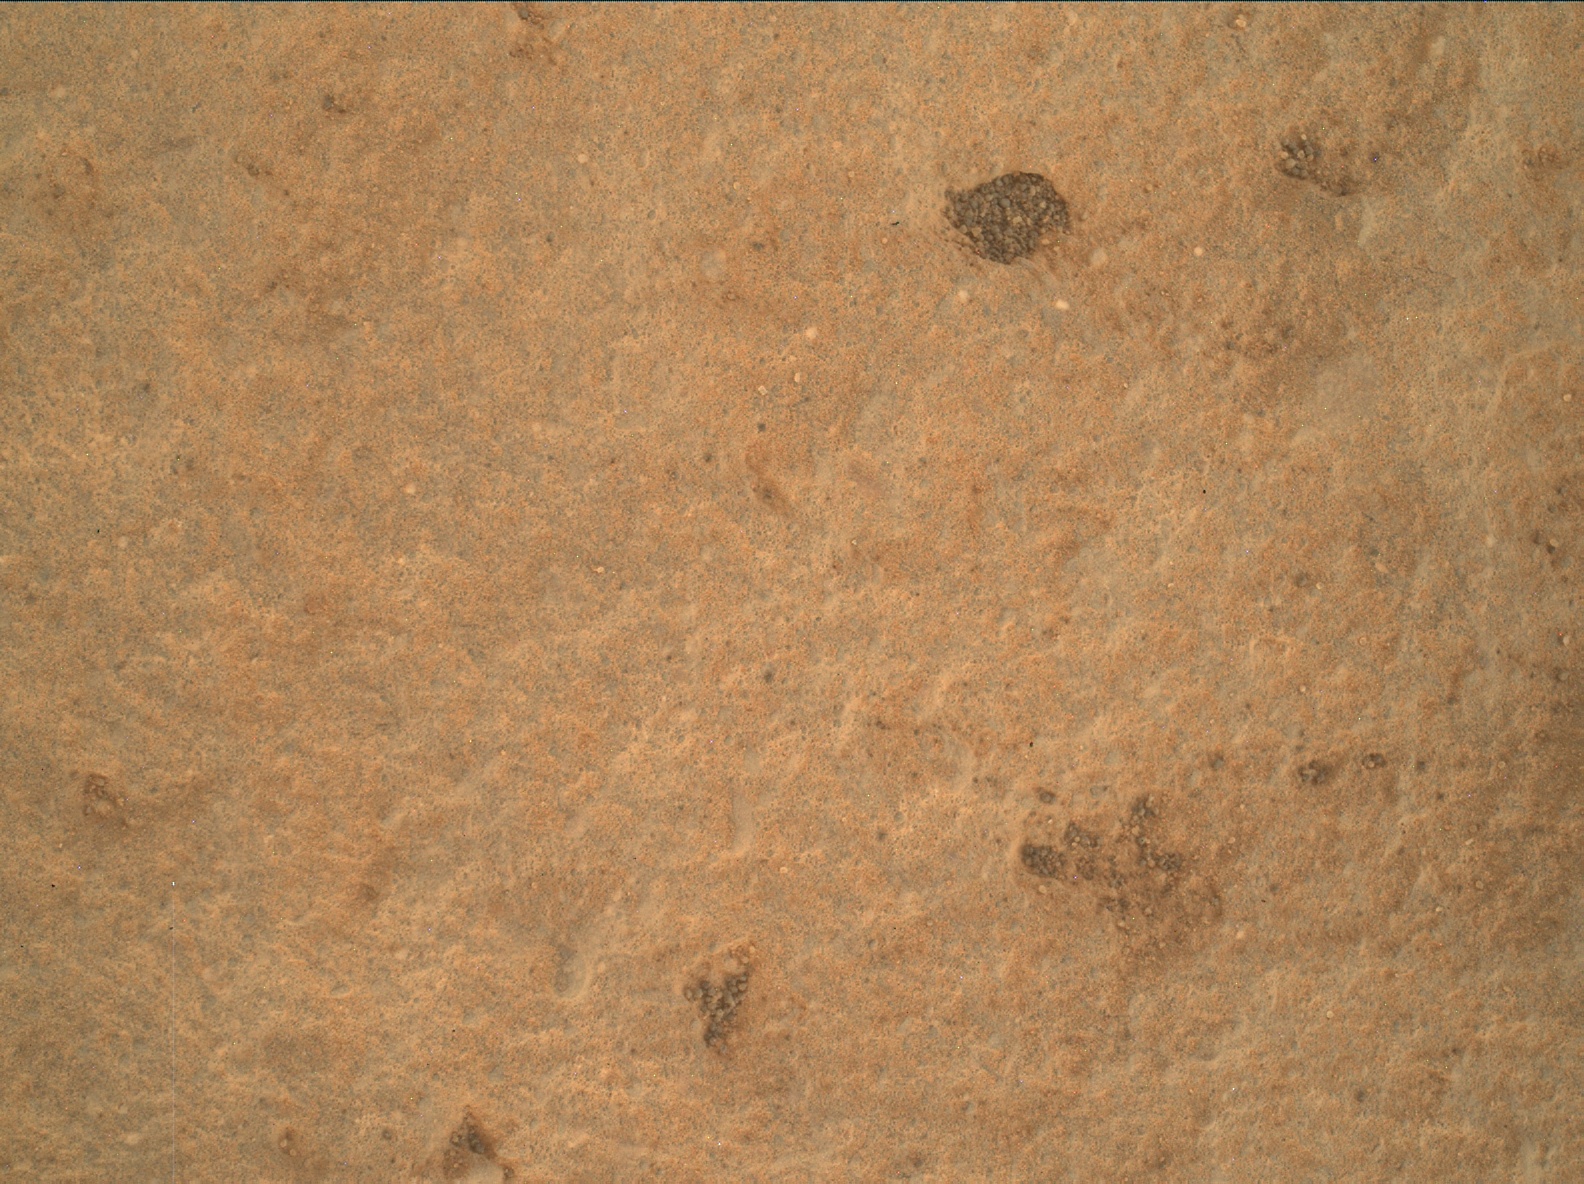 Nasa's Mars rover Curiosity acquired this image using its Mars Hand Lens Imager (MAHLI) on Sol 3323